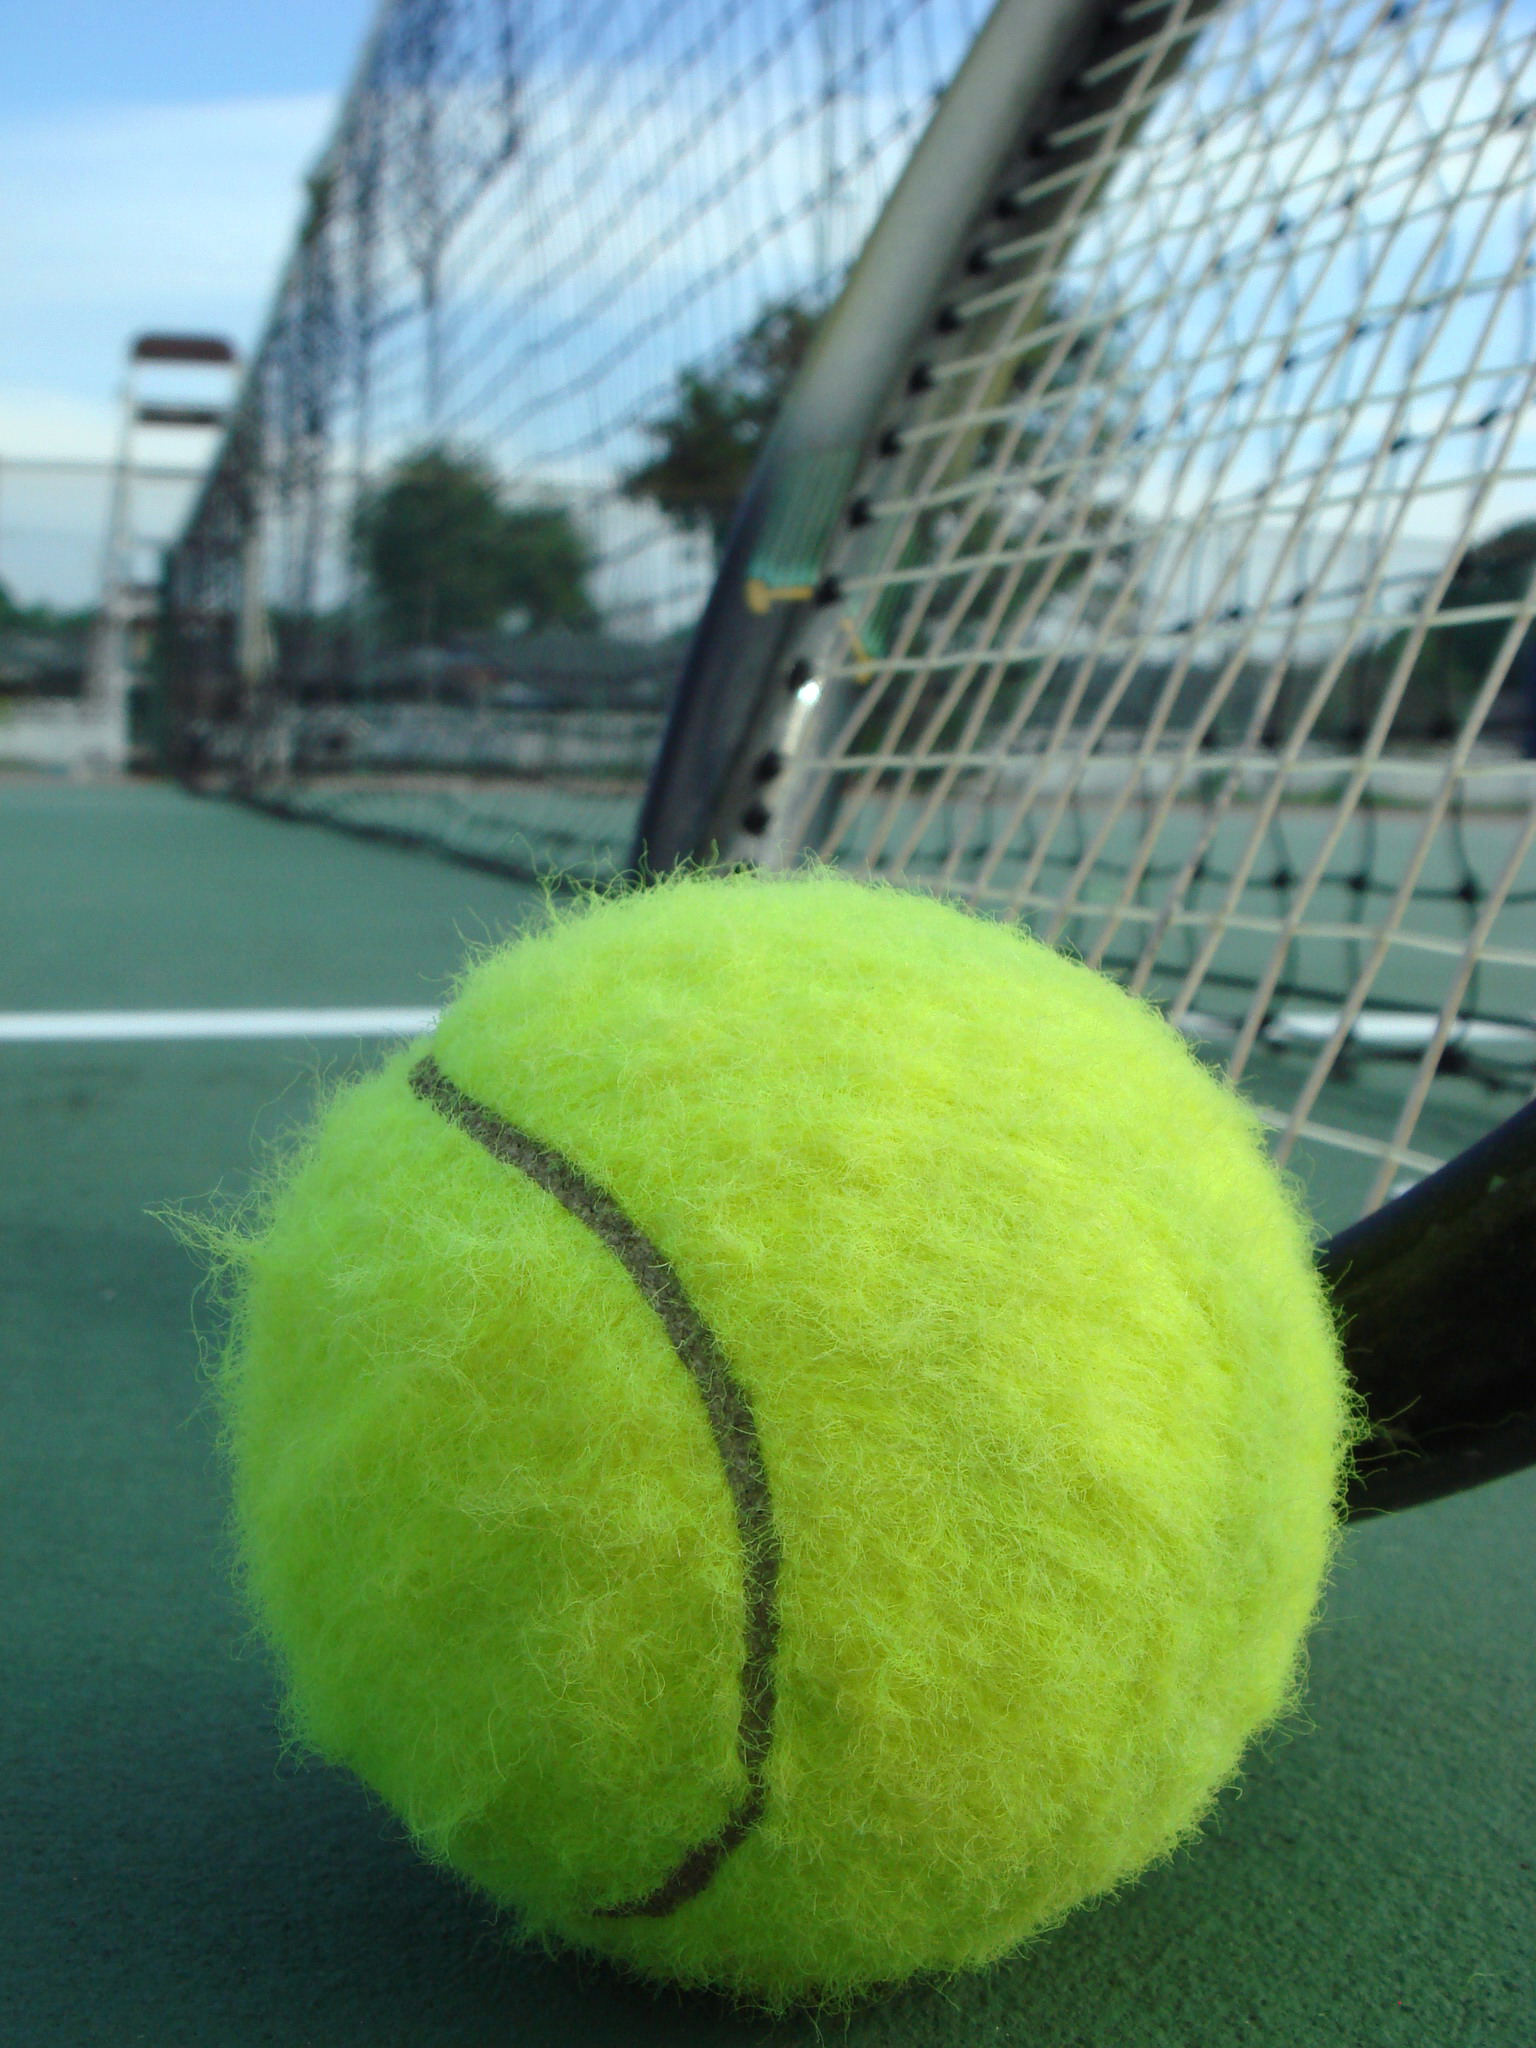 a yellow tennis ball with black stitching sitting on the edge of a net